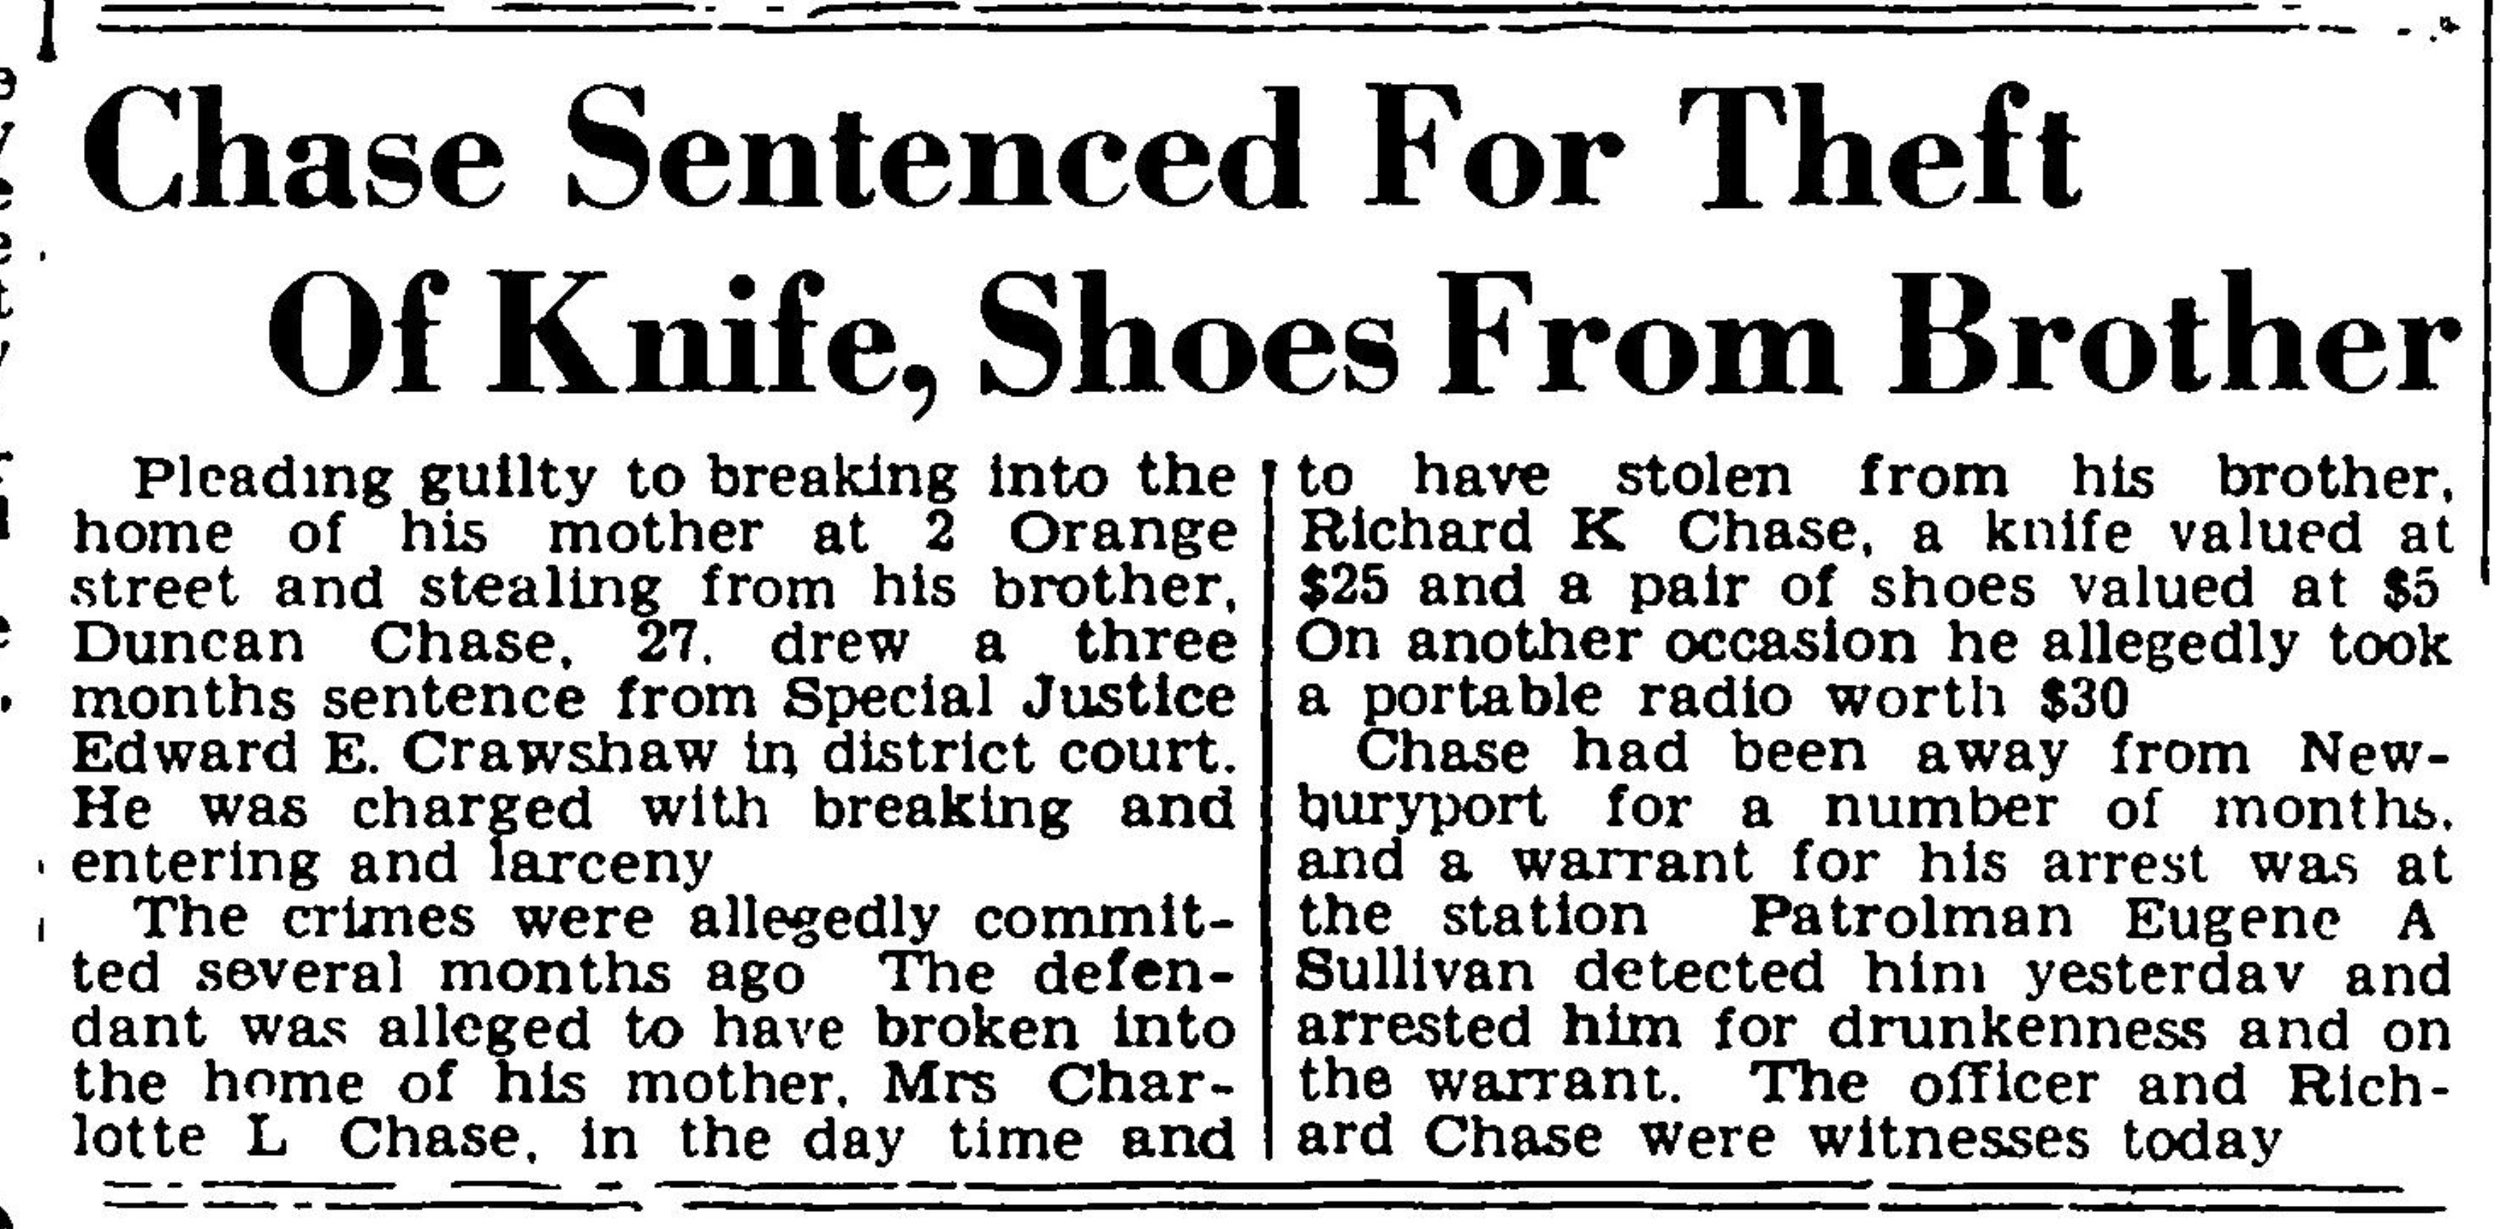 DC Steals from Brother Page 1 of Newburyport Daily News and Newburyport Herald,published in Newburyport, Massachusetts on Saturday, October 26th, 1946.jpeg